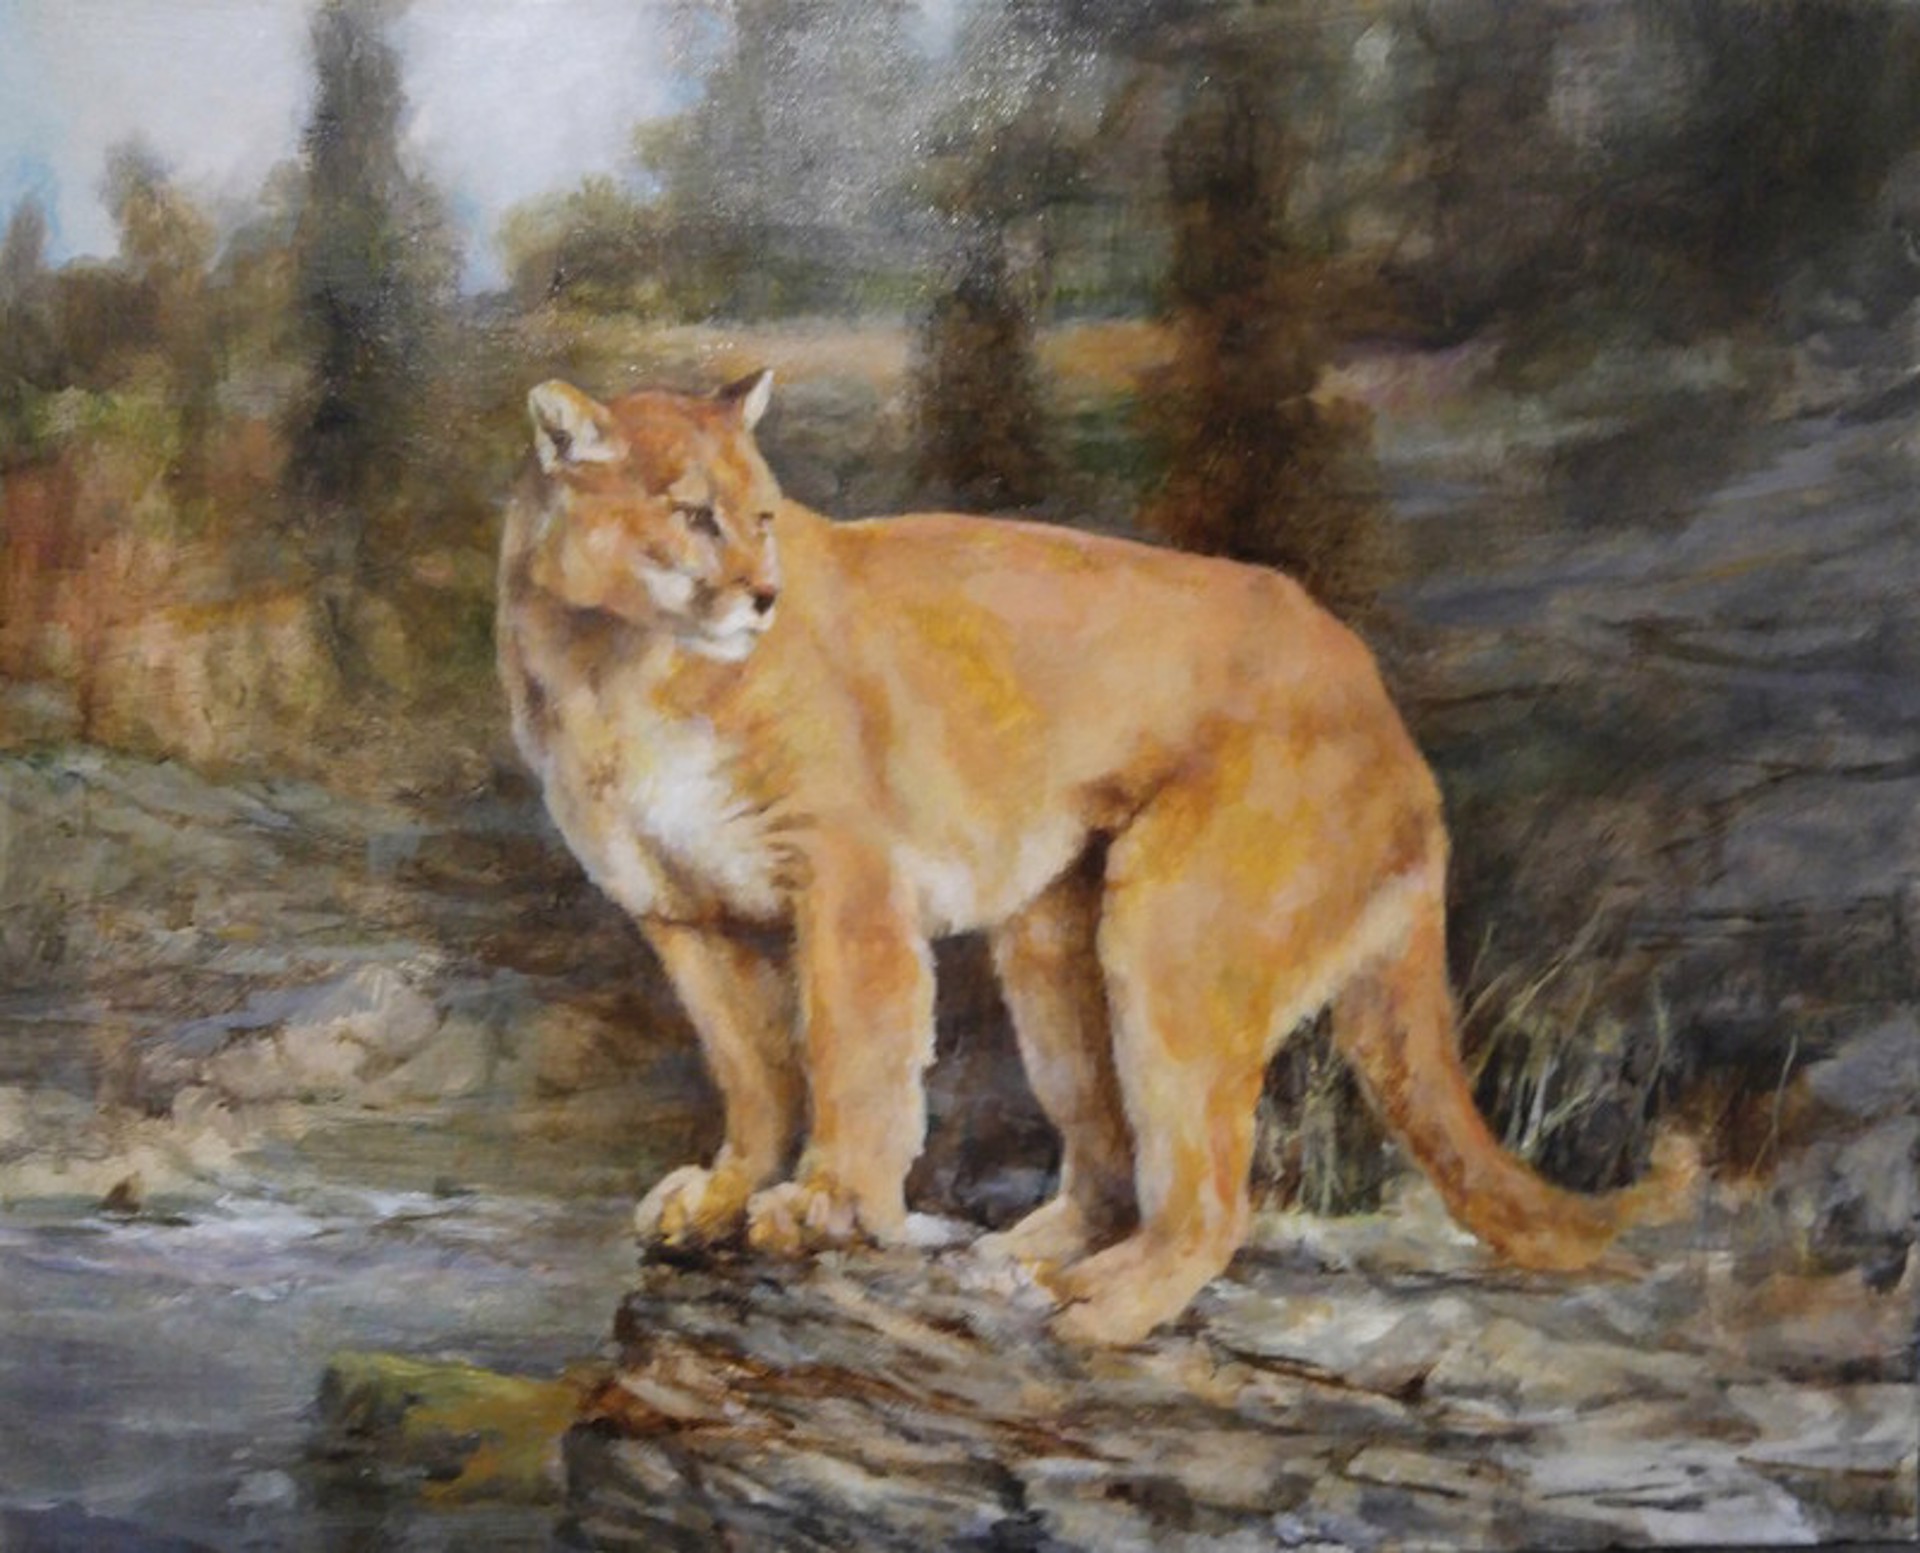 Mountain Lion Moment by Rino Friio